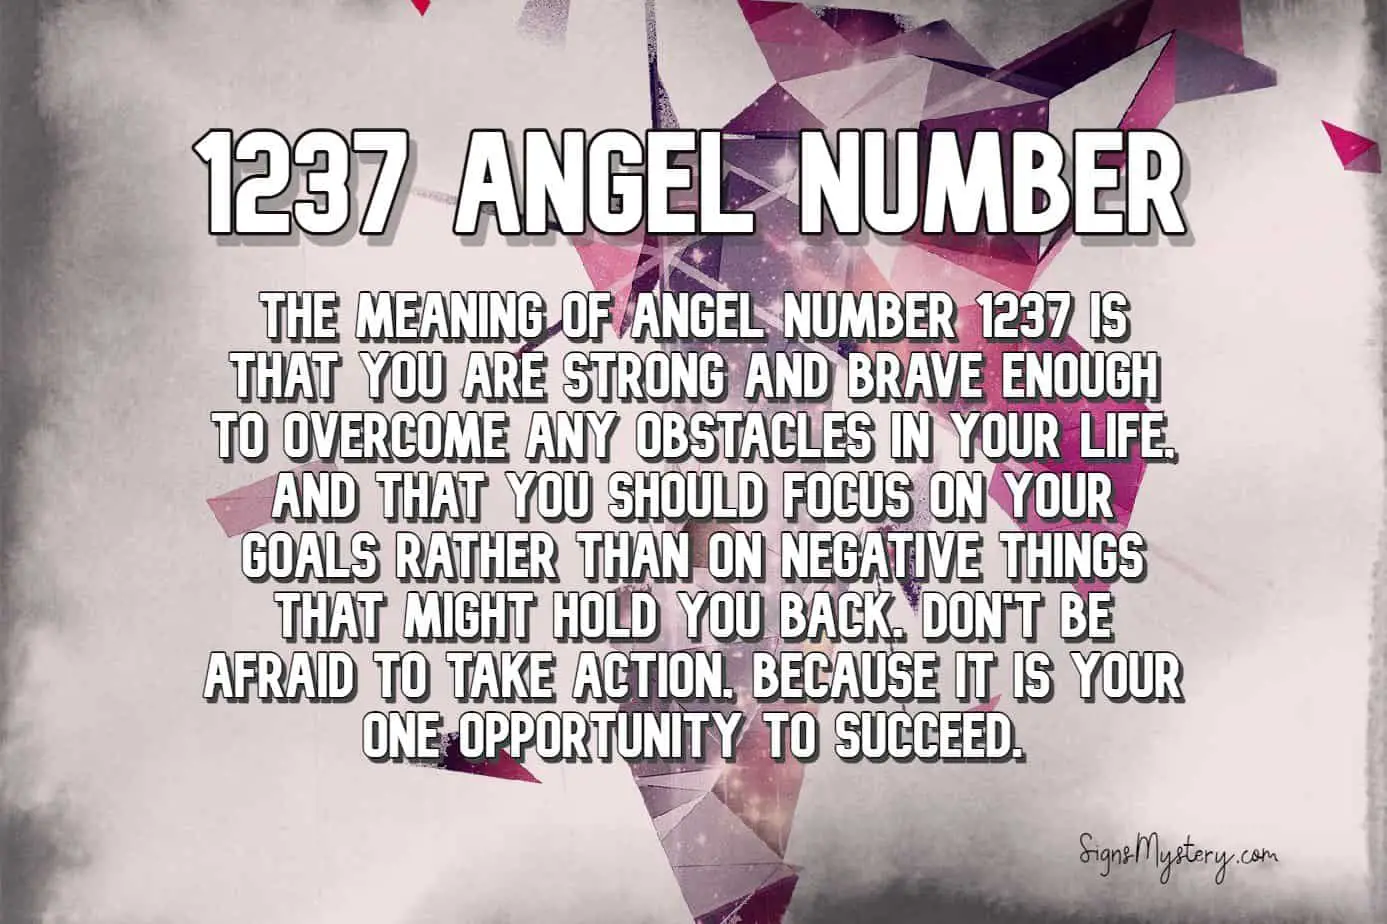 1237 angel number meaning